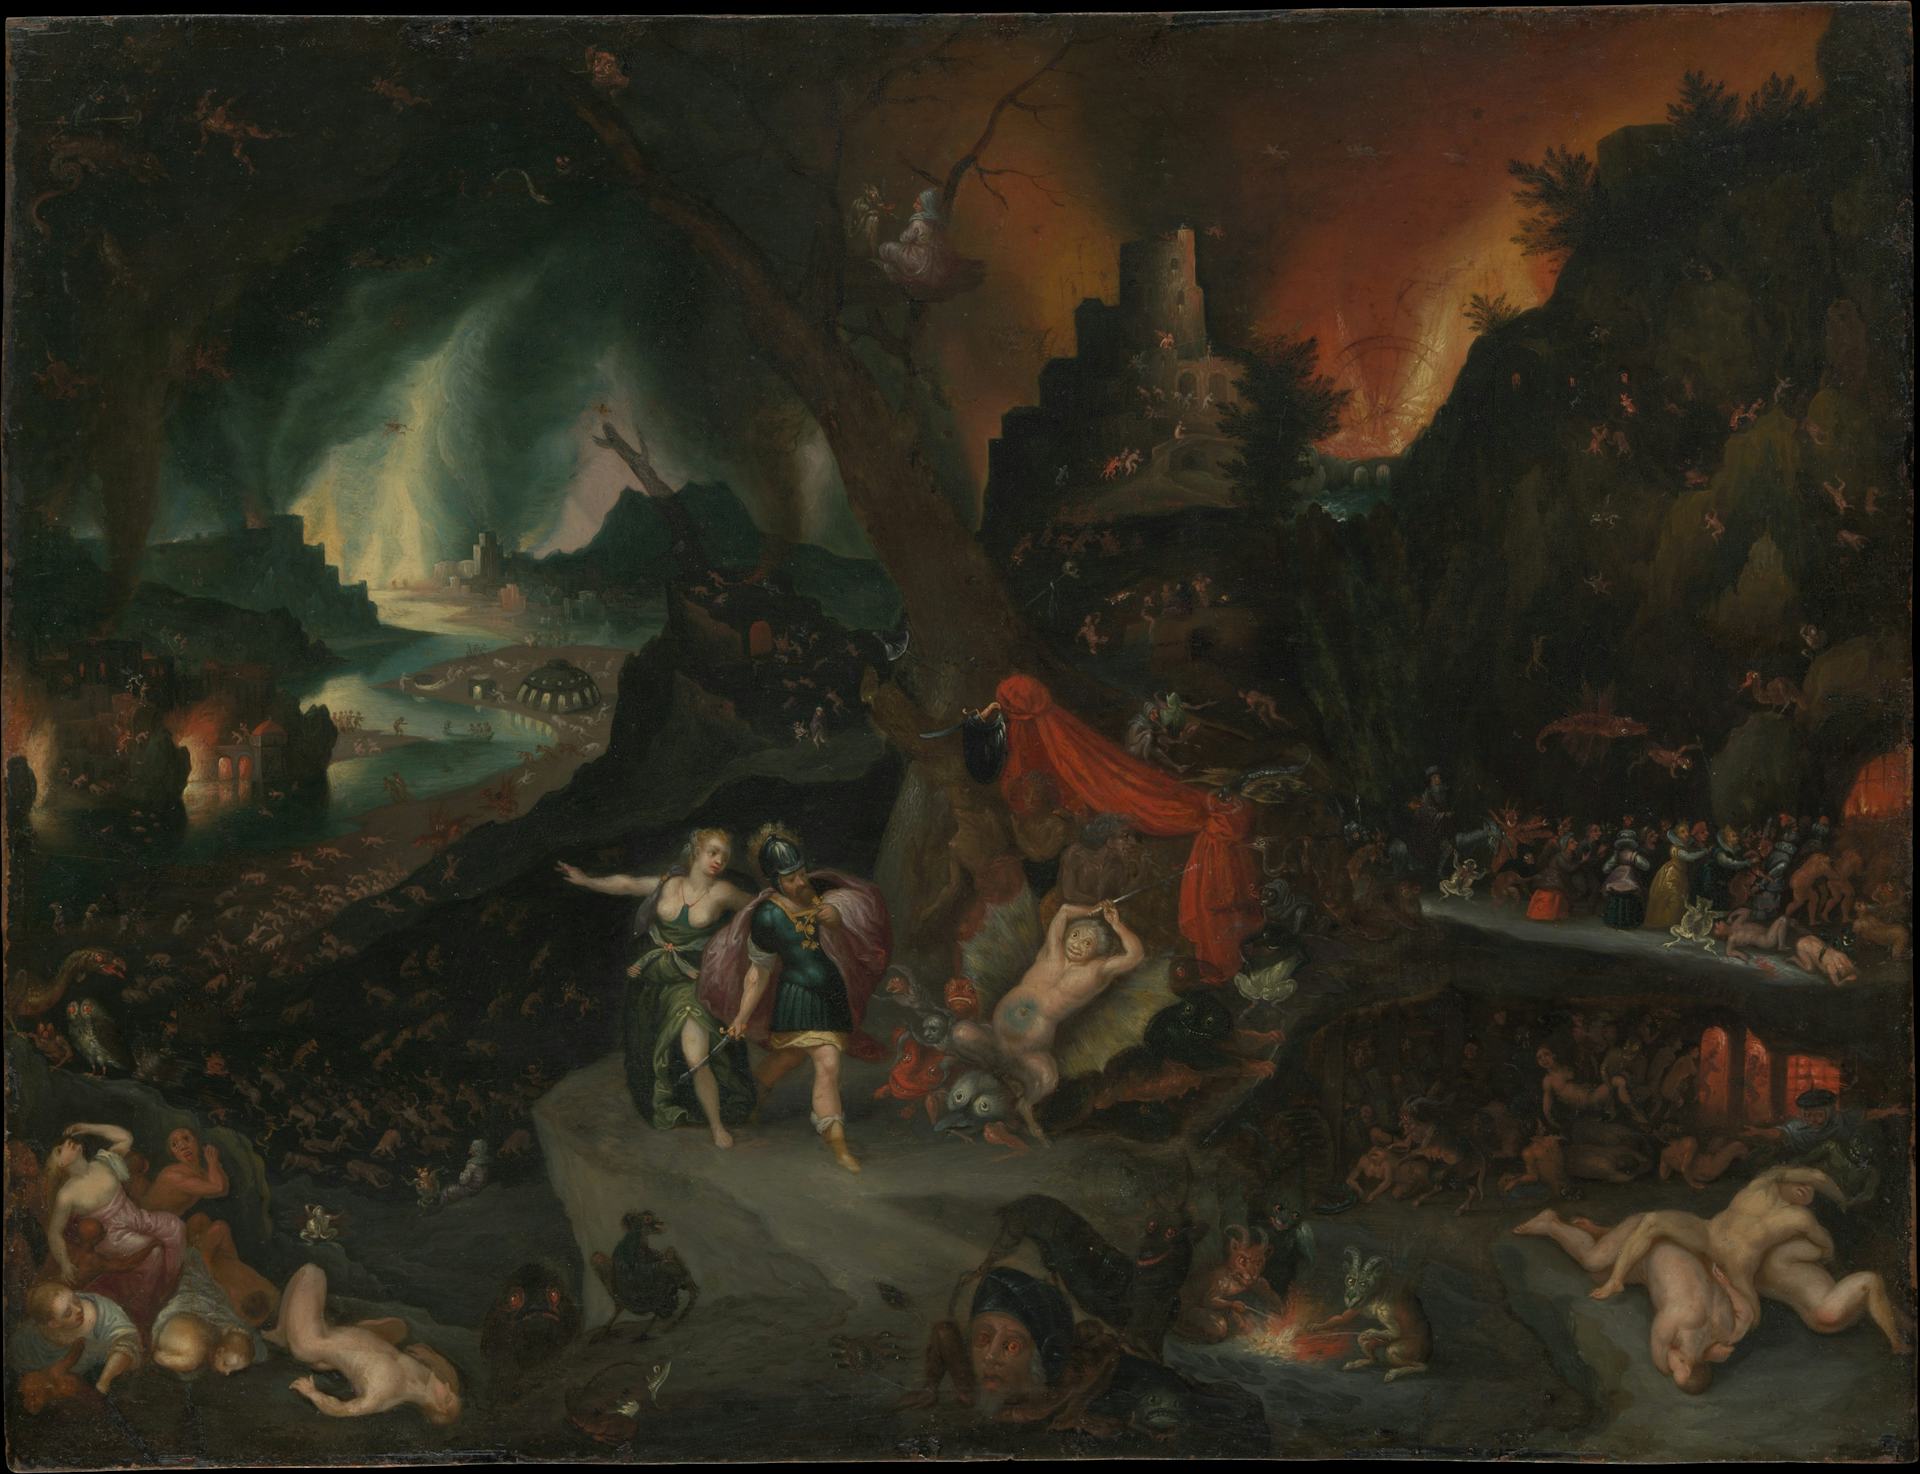 Aeneas and the Sibyl in the Underworld by Jan Brueghel the Younger (ca. 1630s)